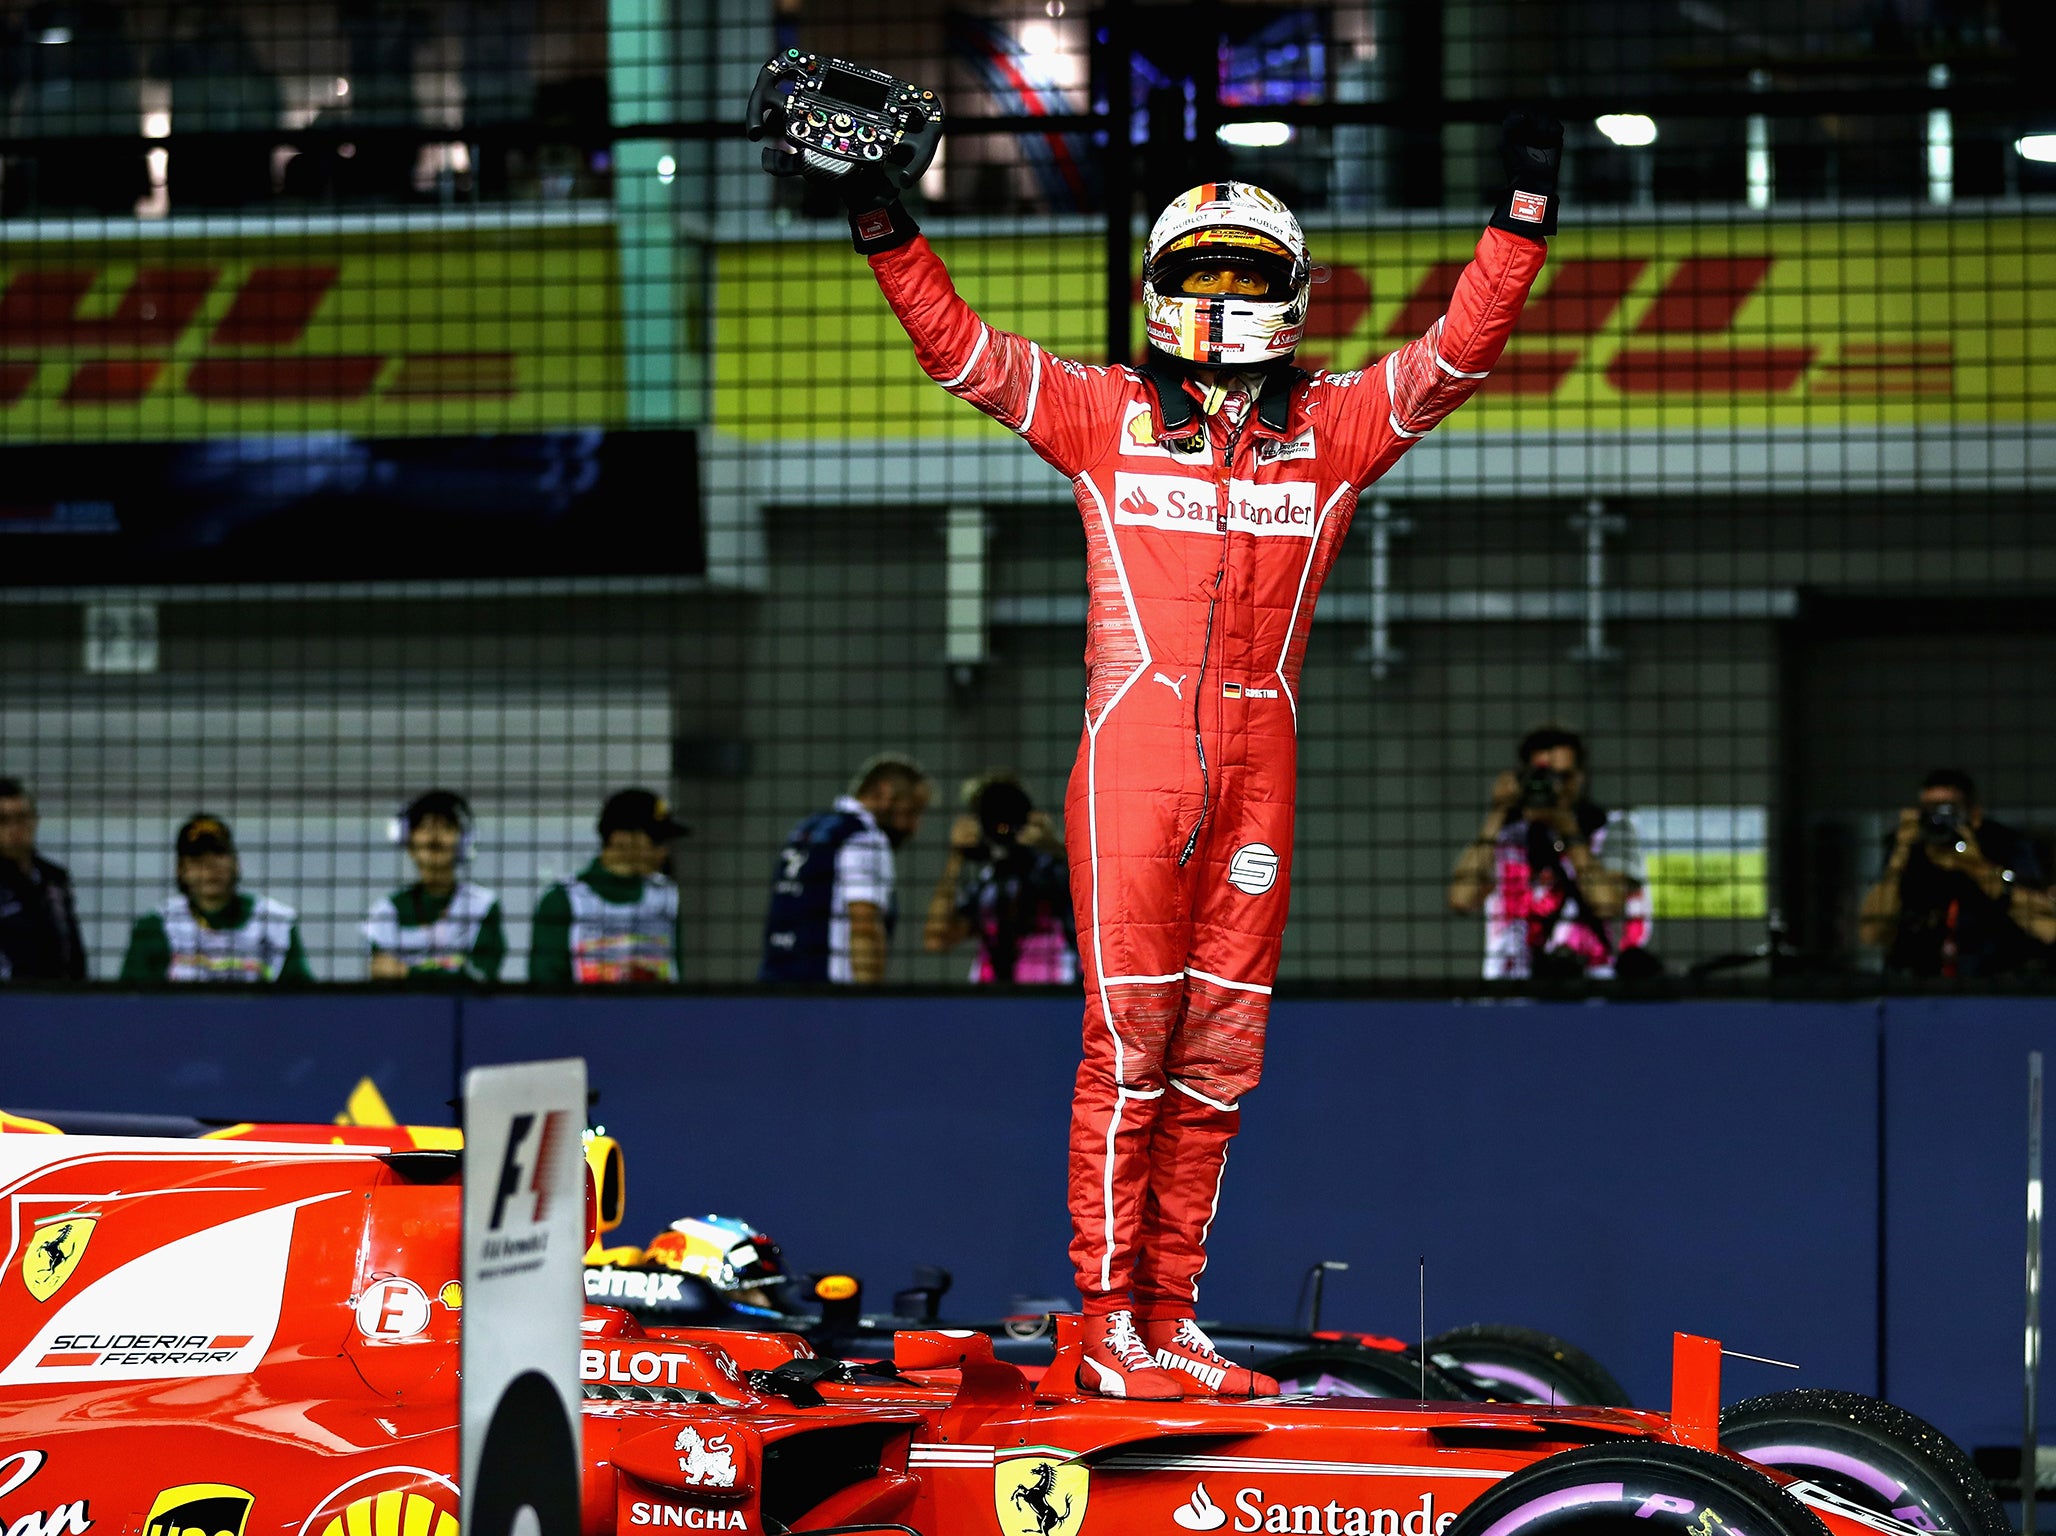 Vettel declared that he "loves this track" after securing pole position